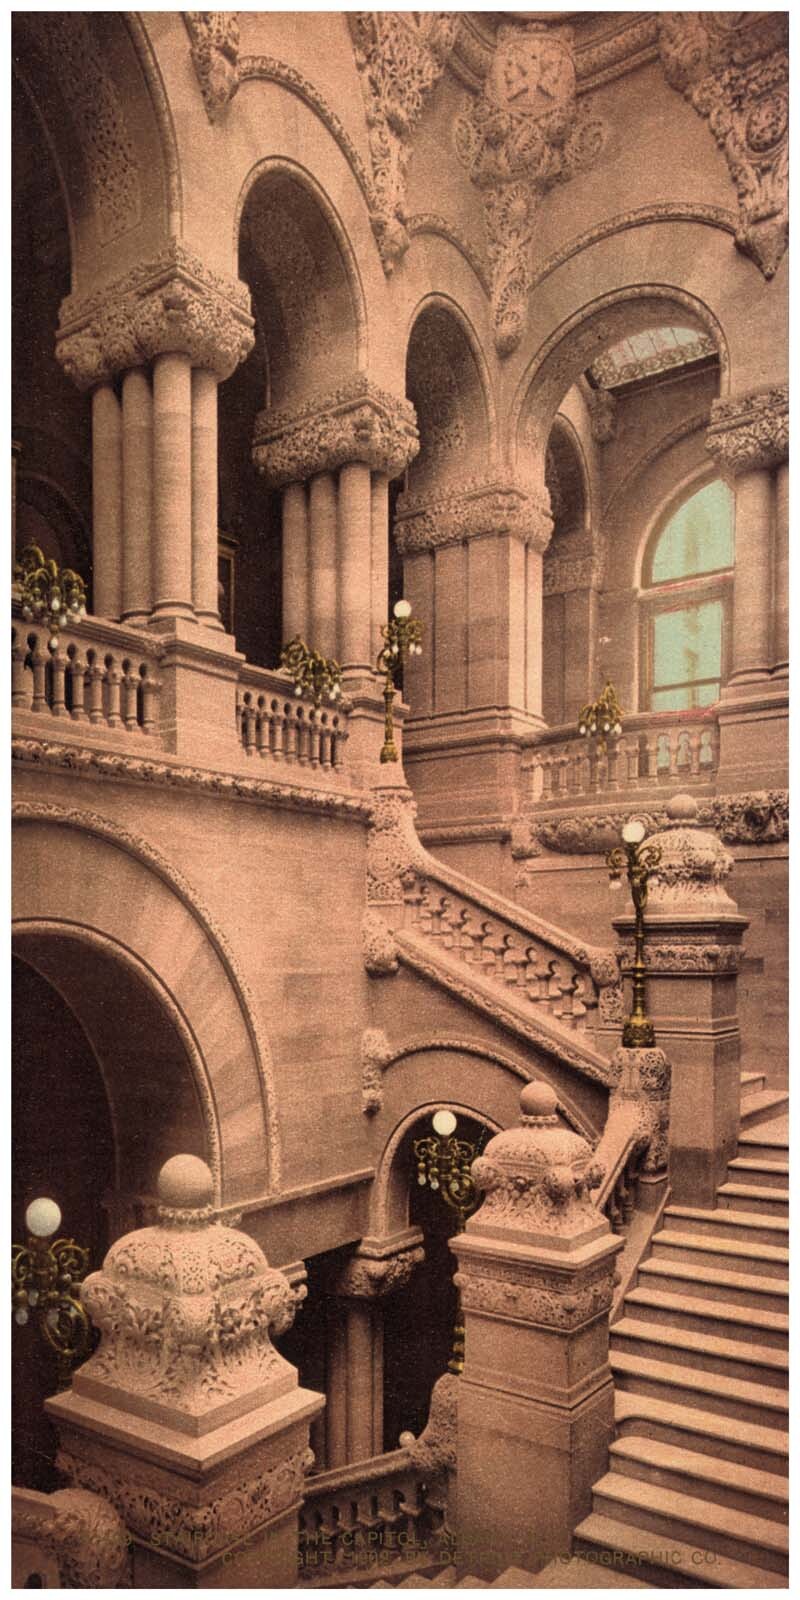 Staircase to the Capitol, Albany, N.Y. 0400-2285